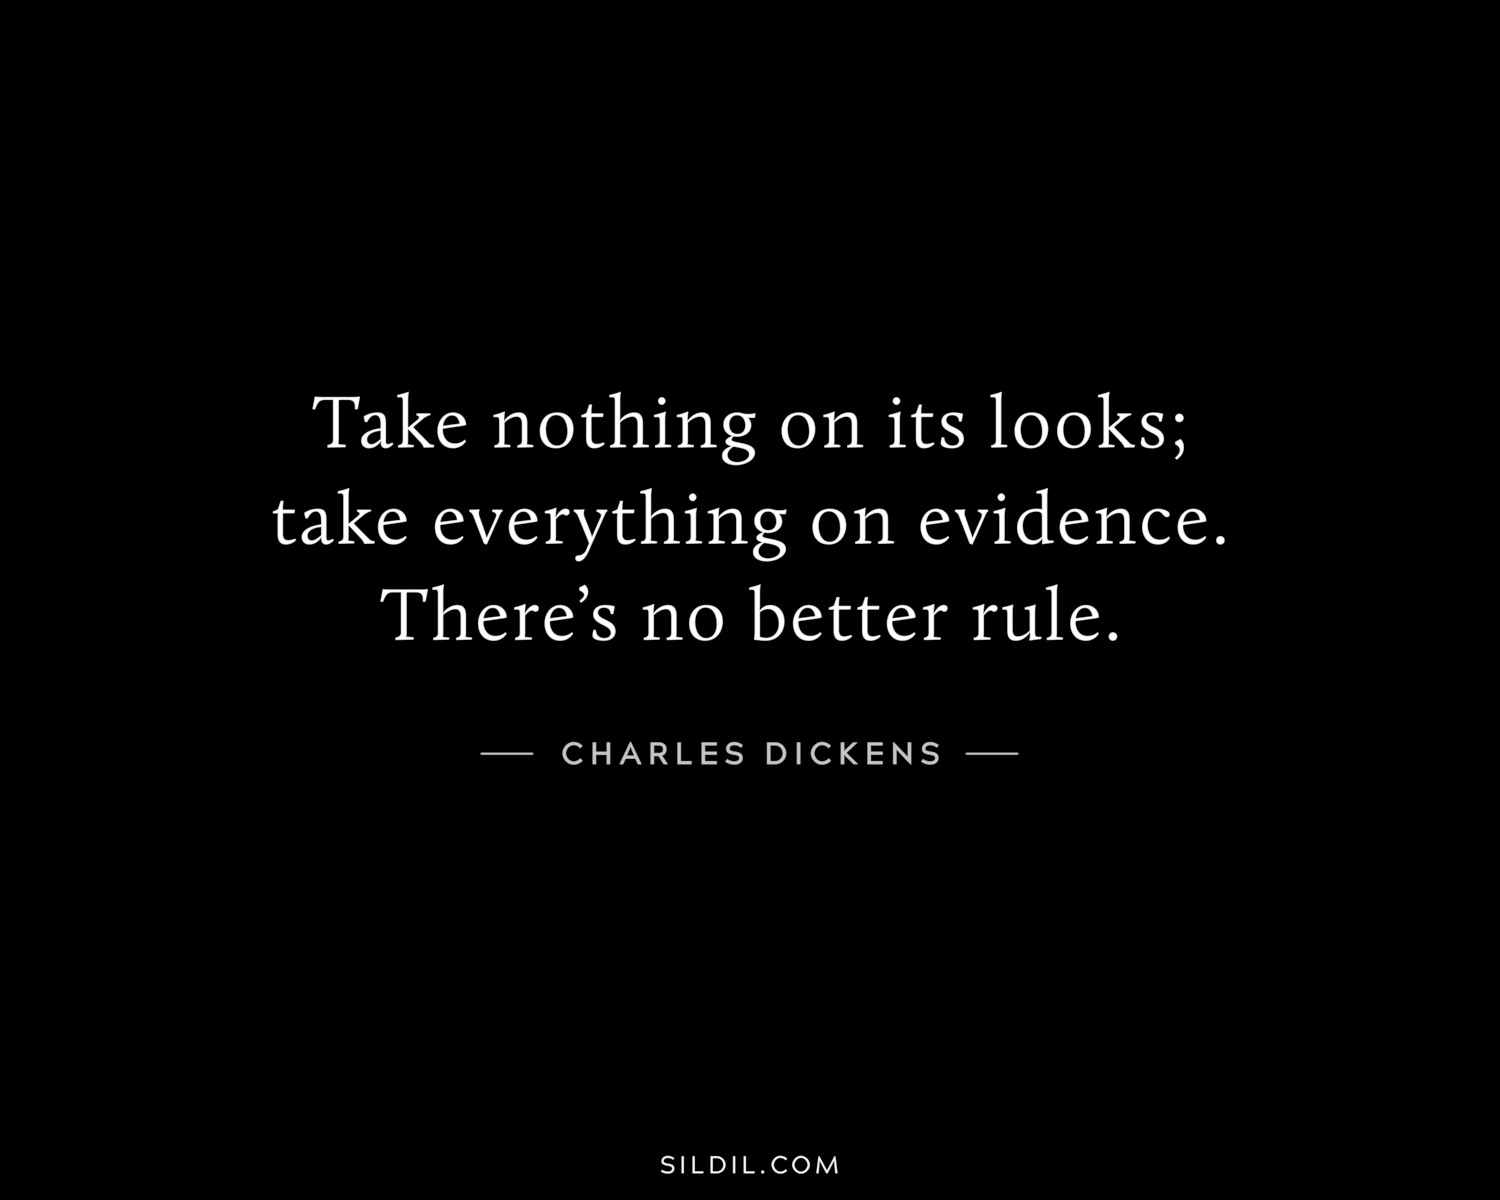 Take nothing on its looks; take everything on evidence. There’s no better rule.